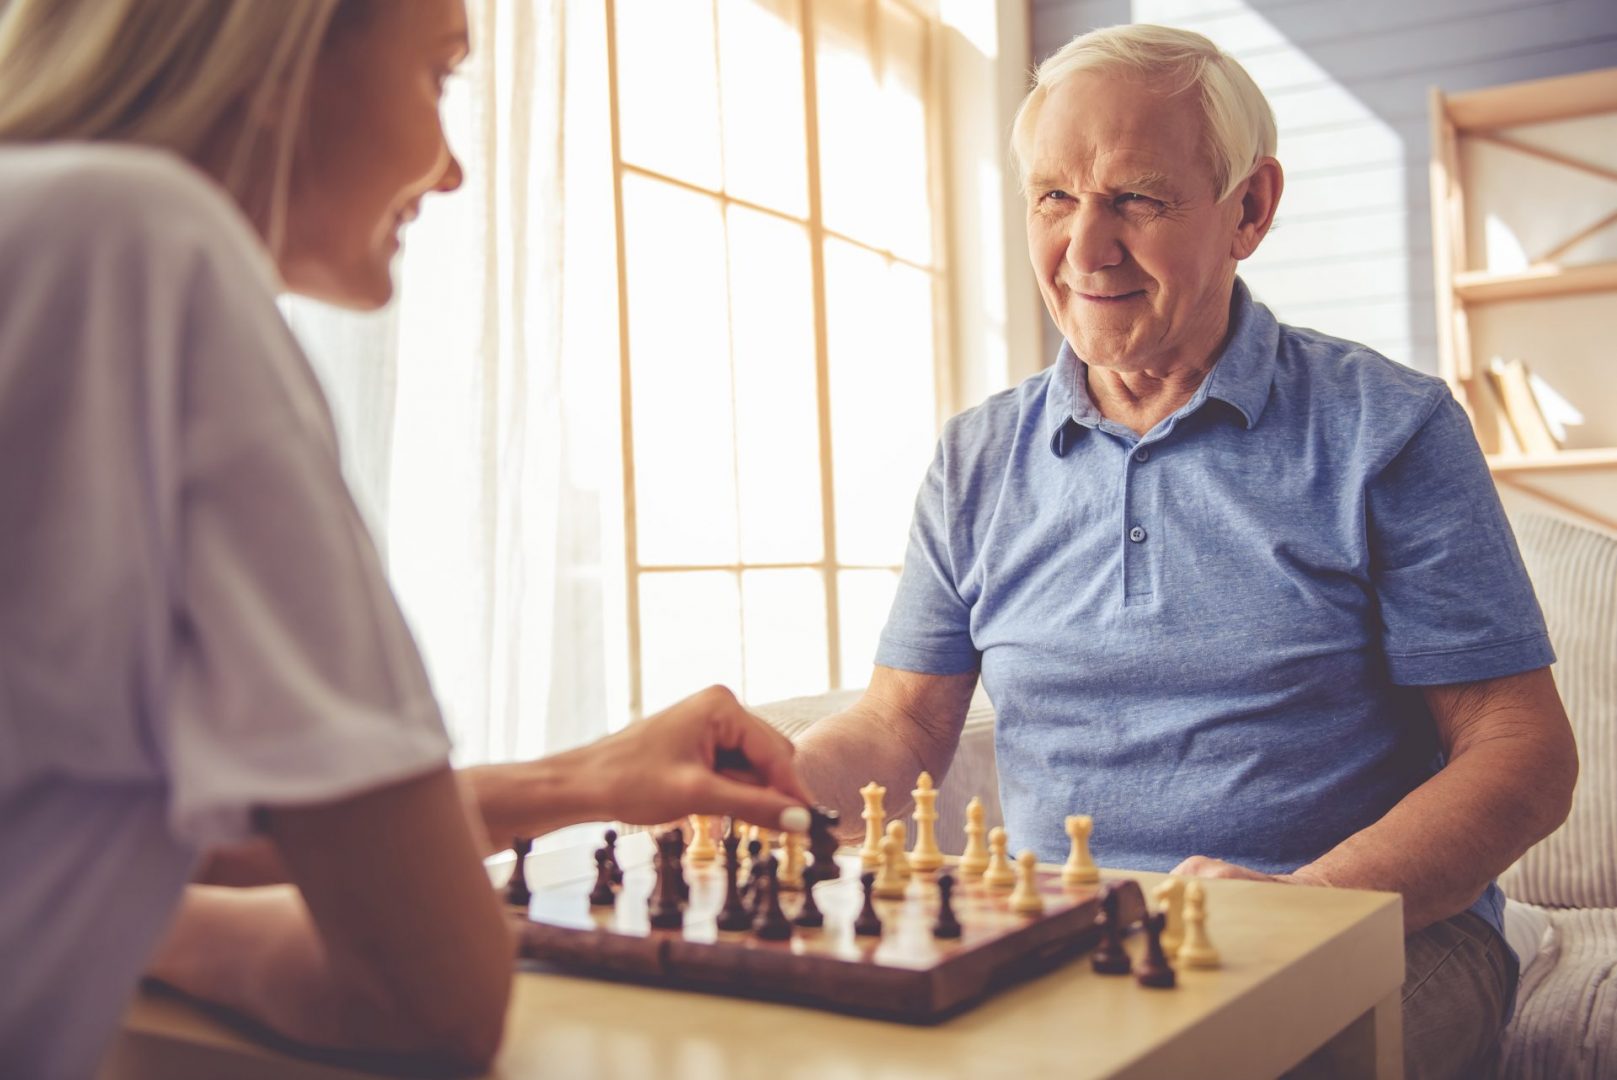 Companion playing chess with elderly patient